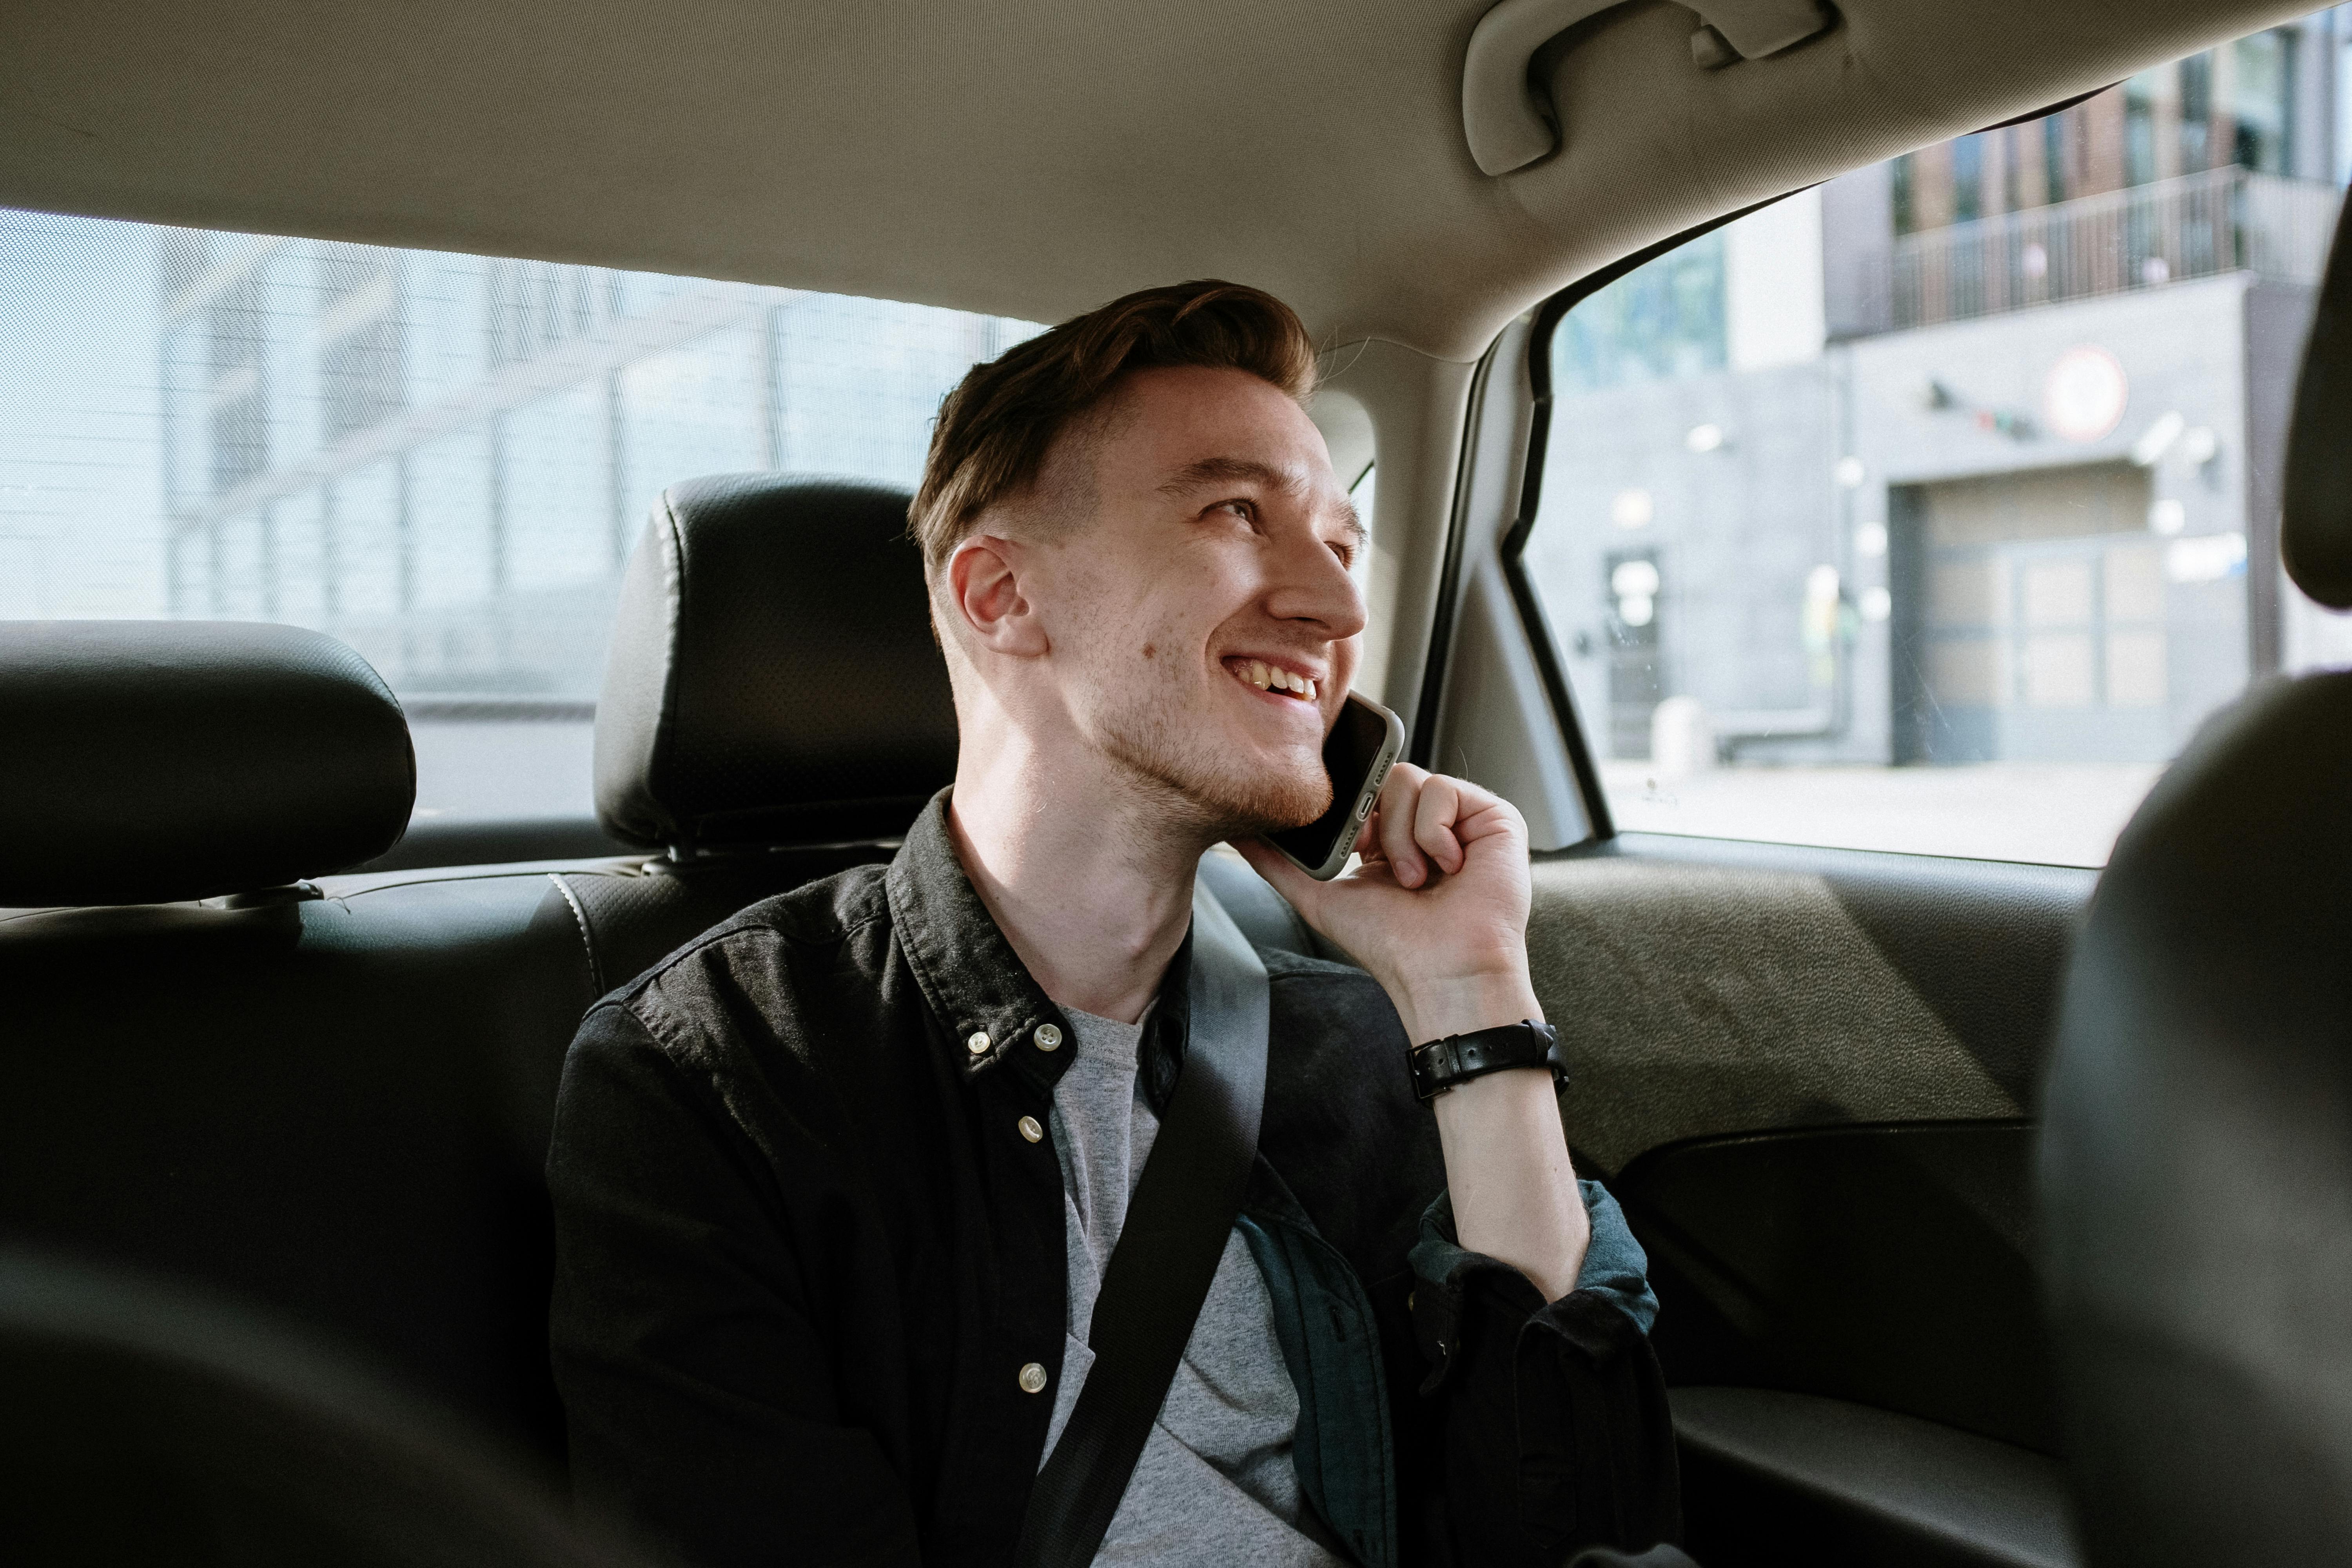 A happy man talking on a phone while riding in a car | Source: Pexels